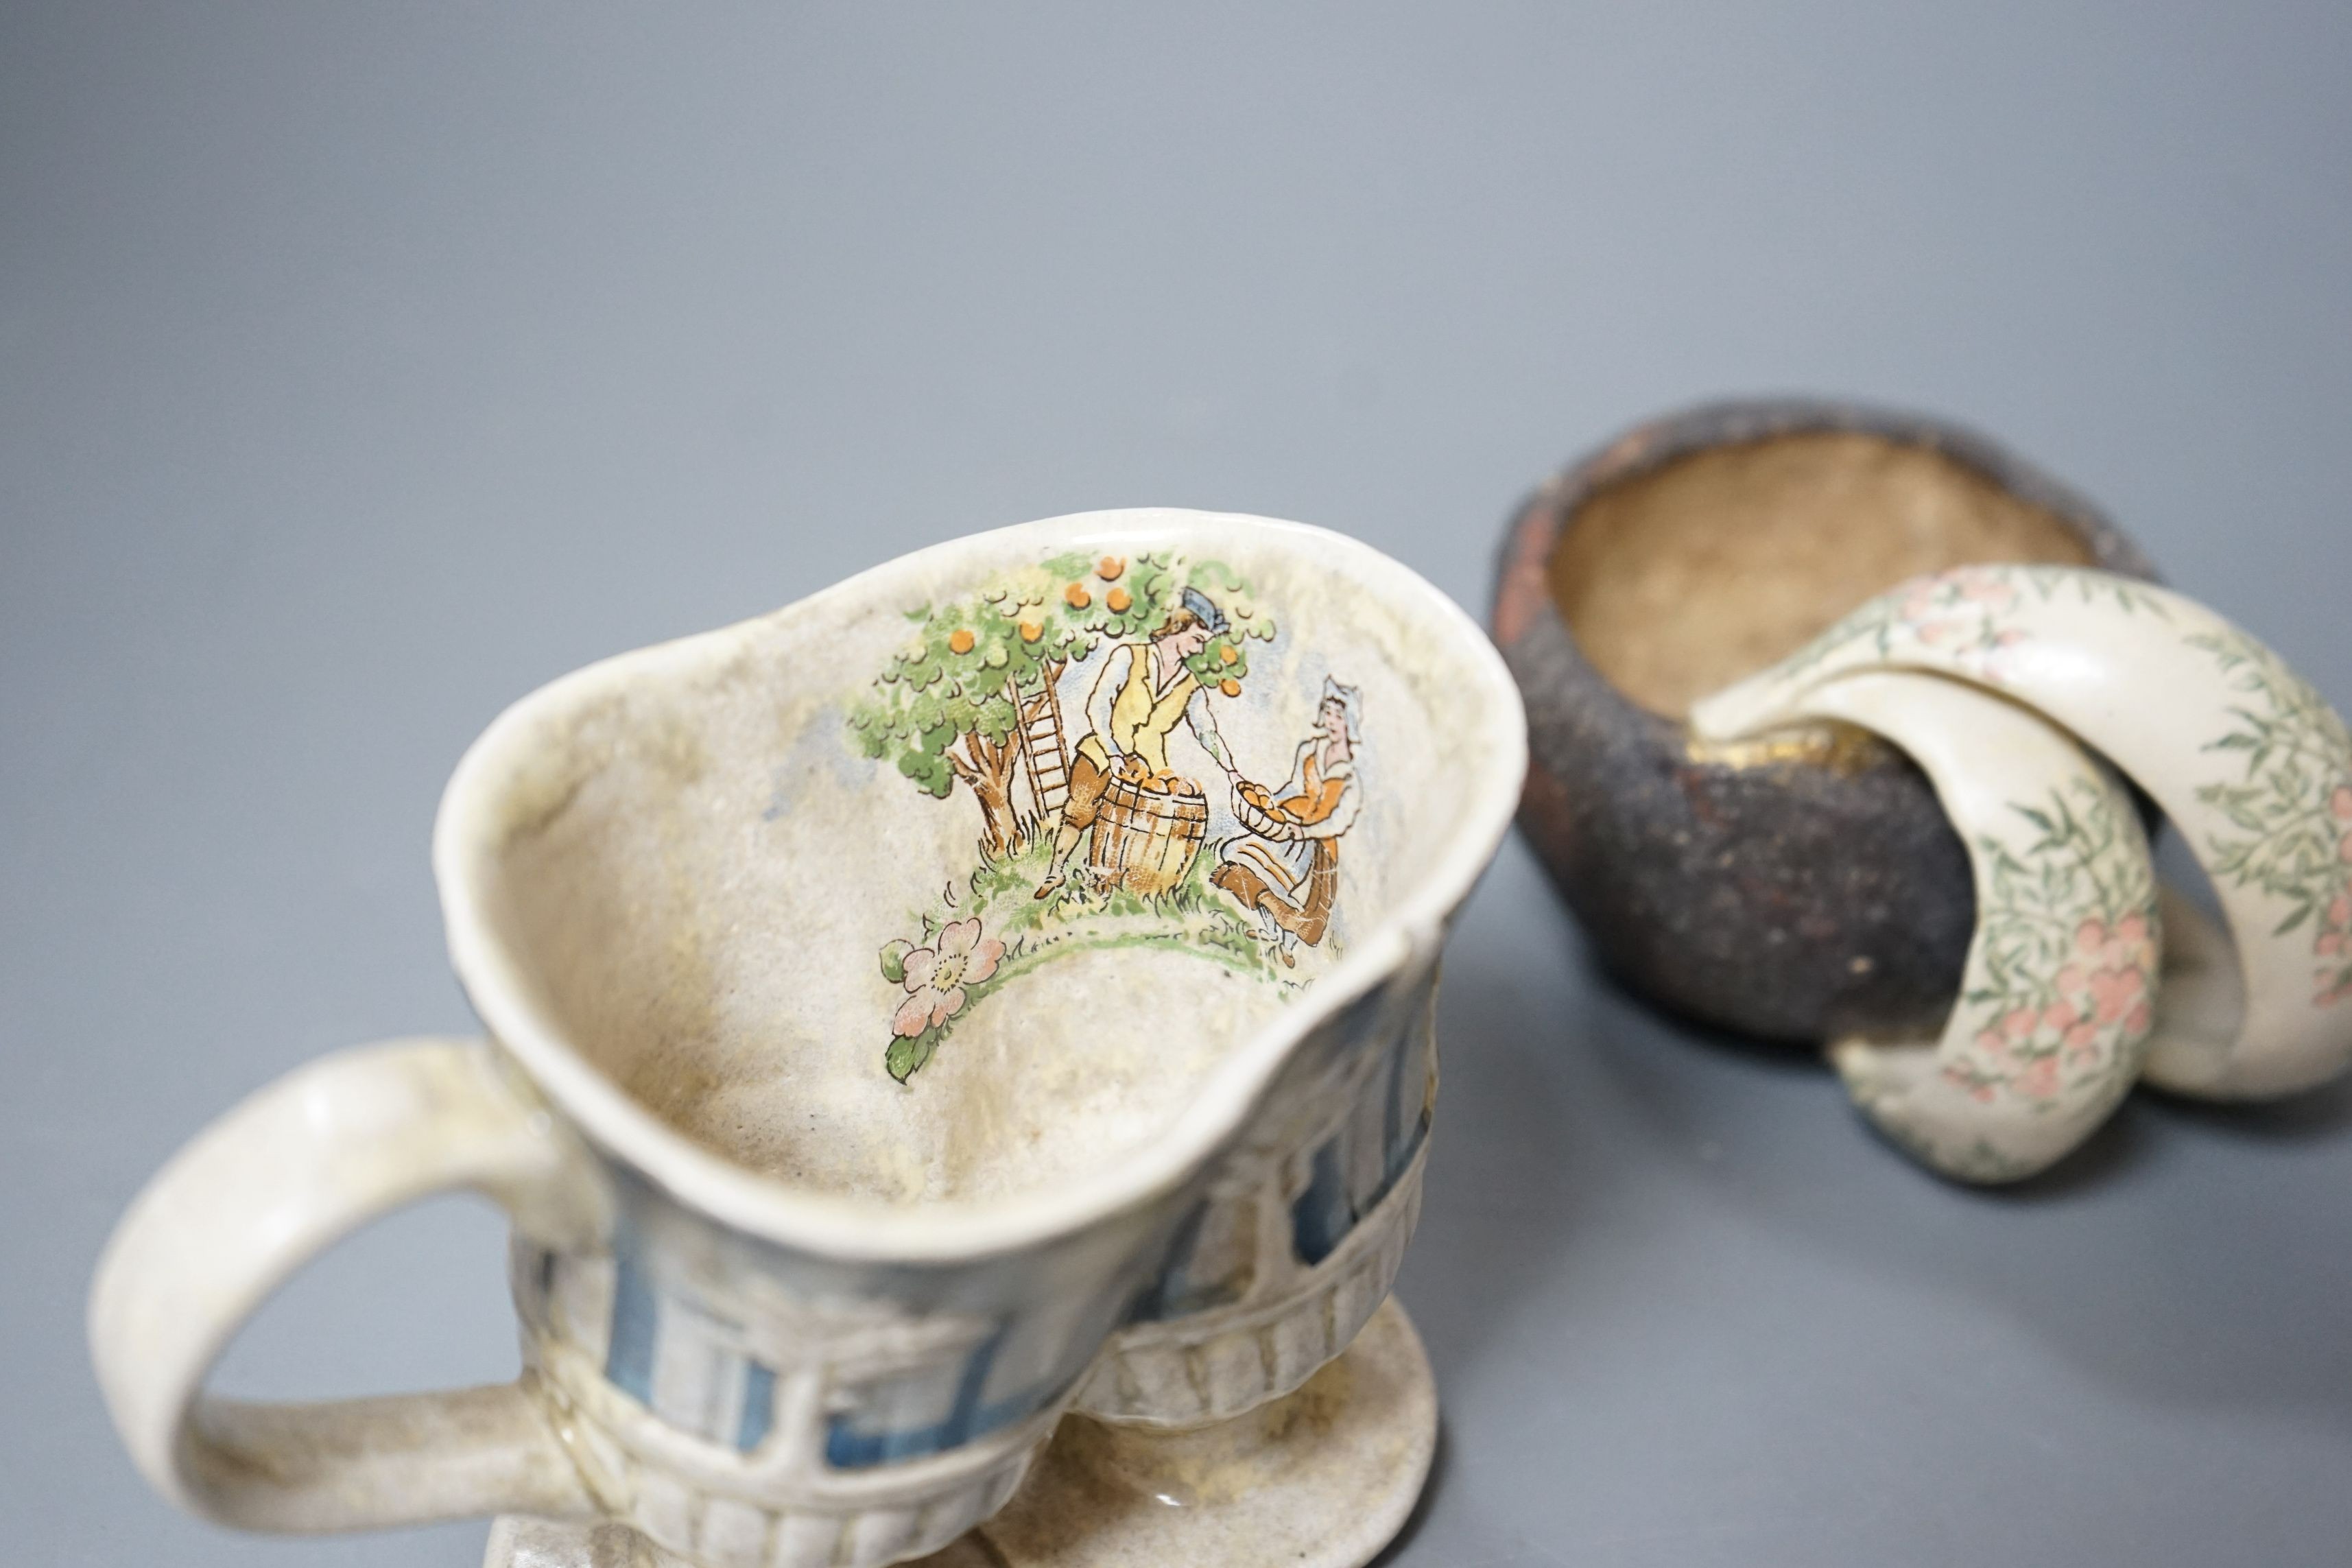 Carol McNicoll (b.1943), ‘Many a slip’ cup and another cup, with purchase receipt from Marsden Woo Gallery, 3 September 2015, tallest 10cm, (2)